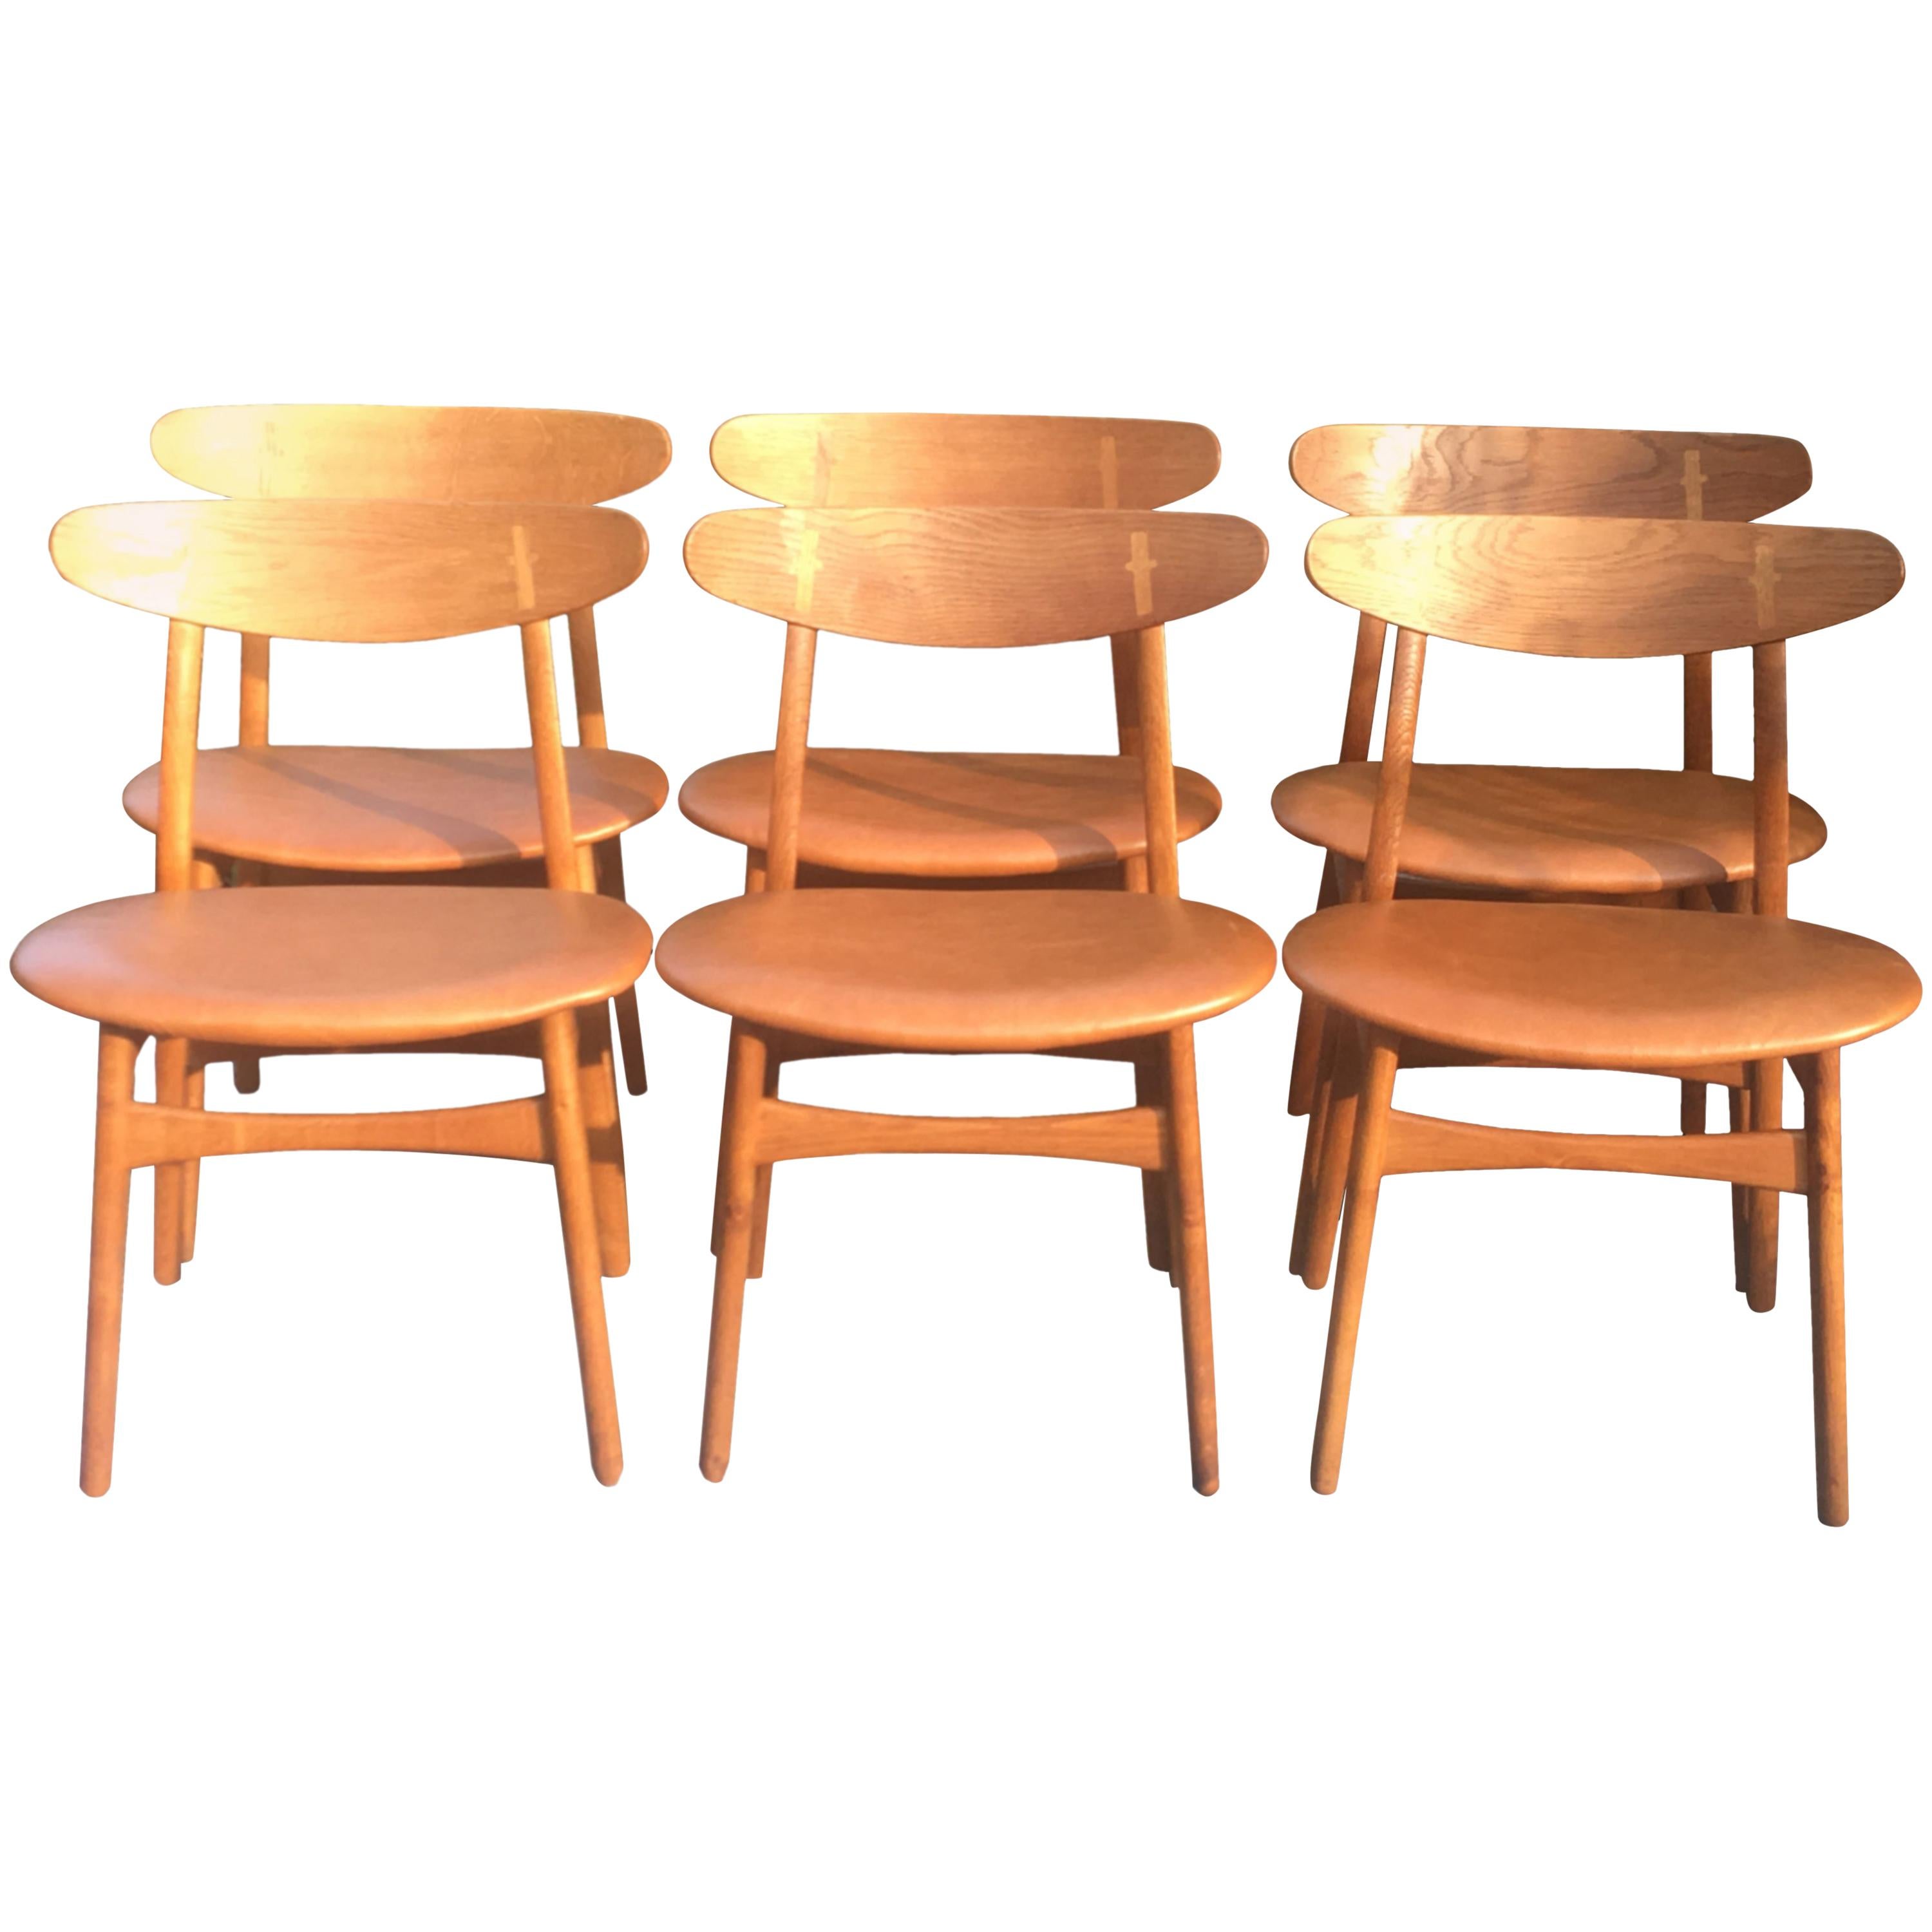 Six Oak and Leather CH30 Dining Chairs by Hans J Wegner for Carl hansen & Son